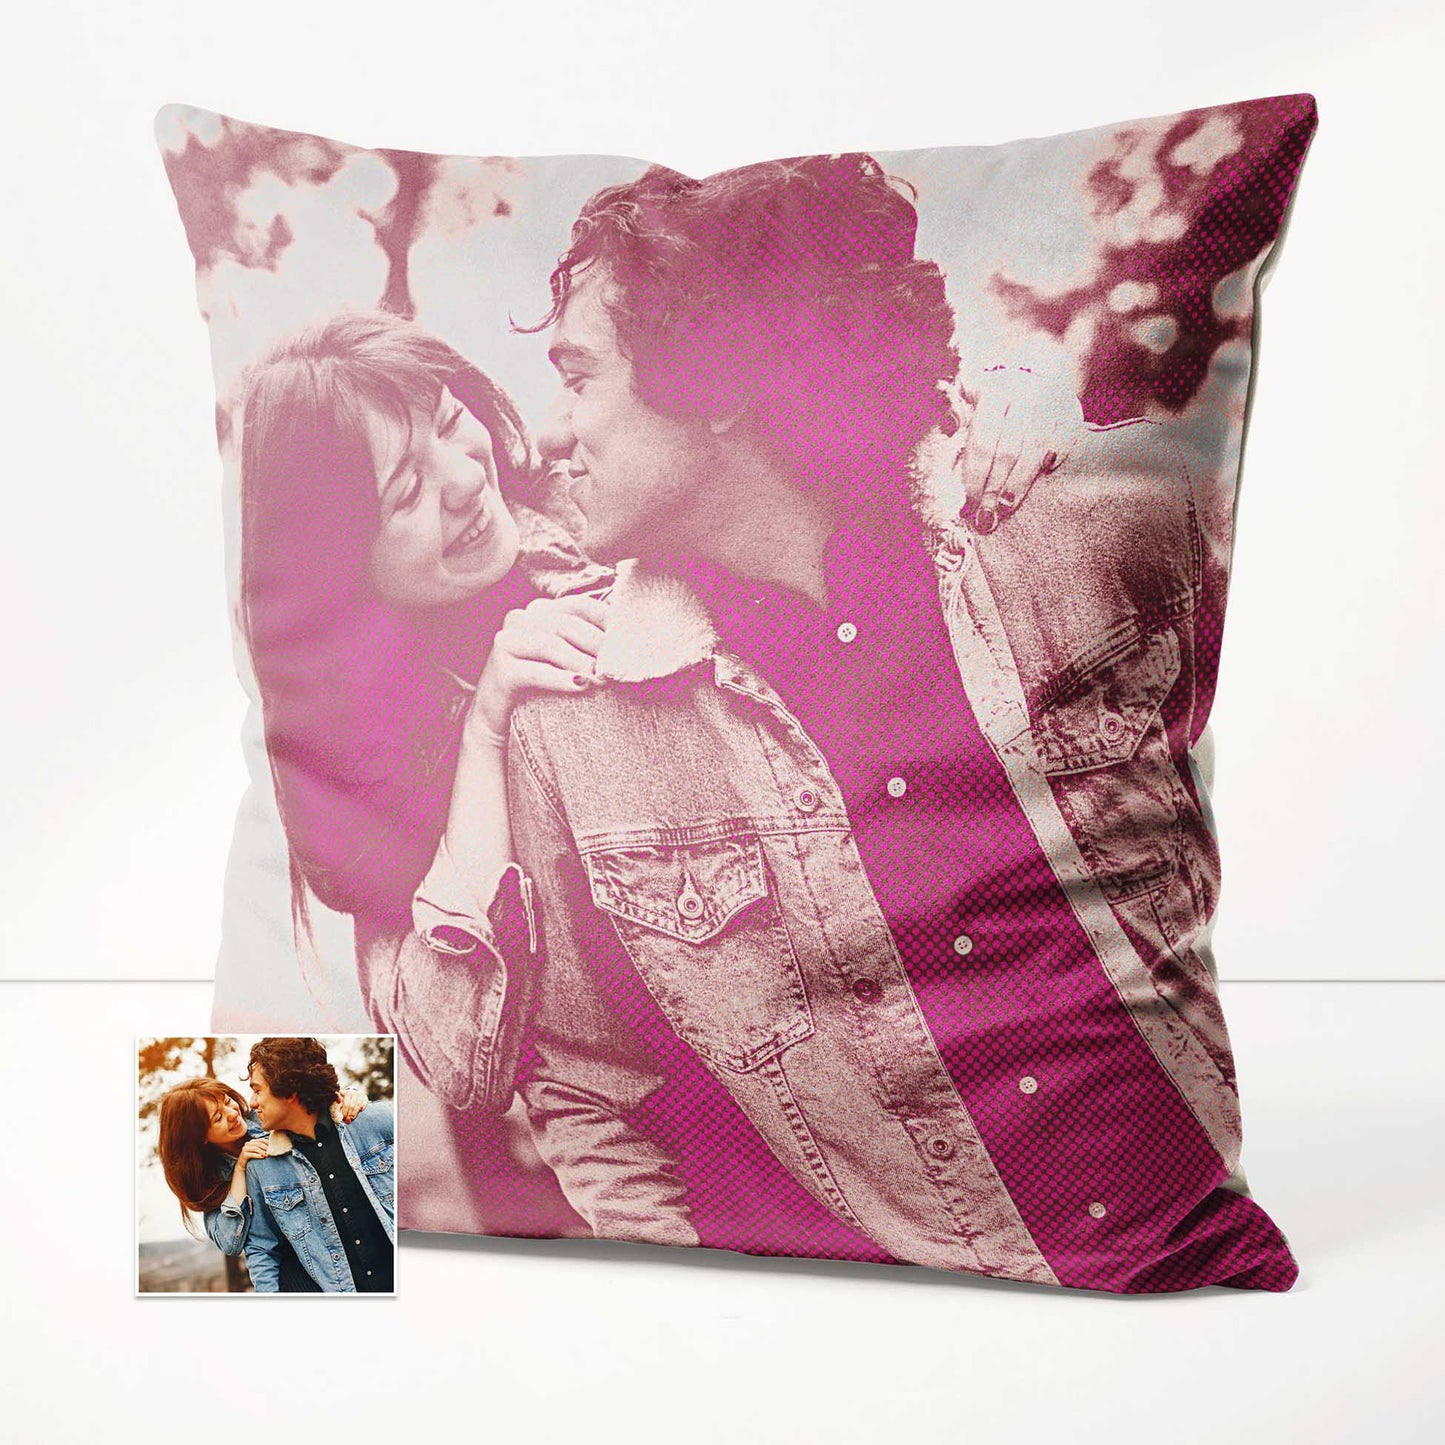 The Personalised Pink Pop Art Cushion is a vibrant and eye-catching addition to any home decor. With its halftone texture and unique design, this cushion transforms your favorite photo into a creative and original piece of art